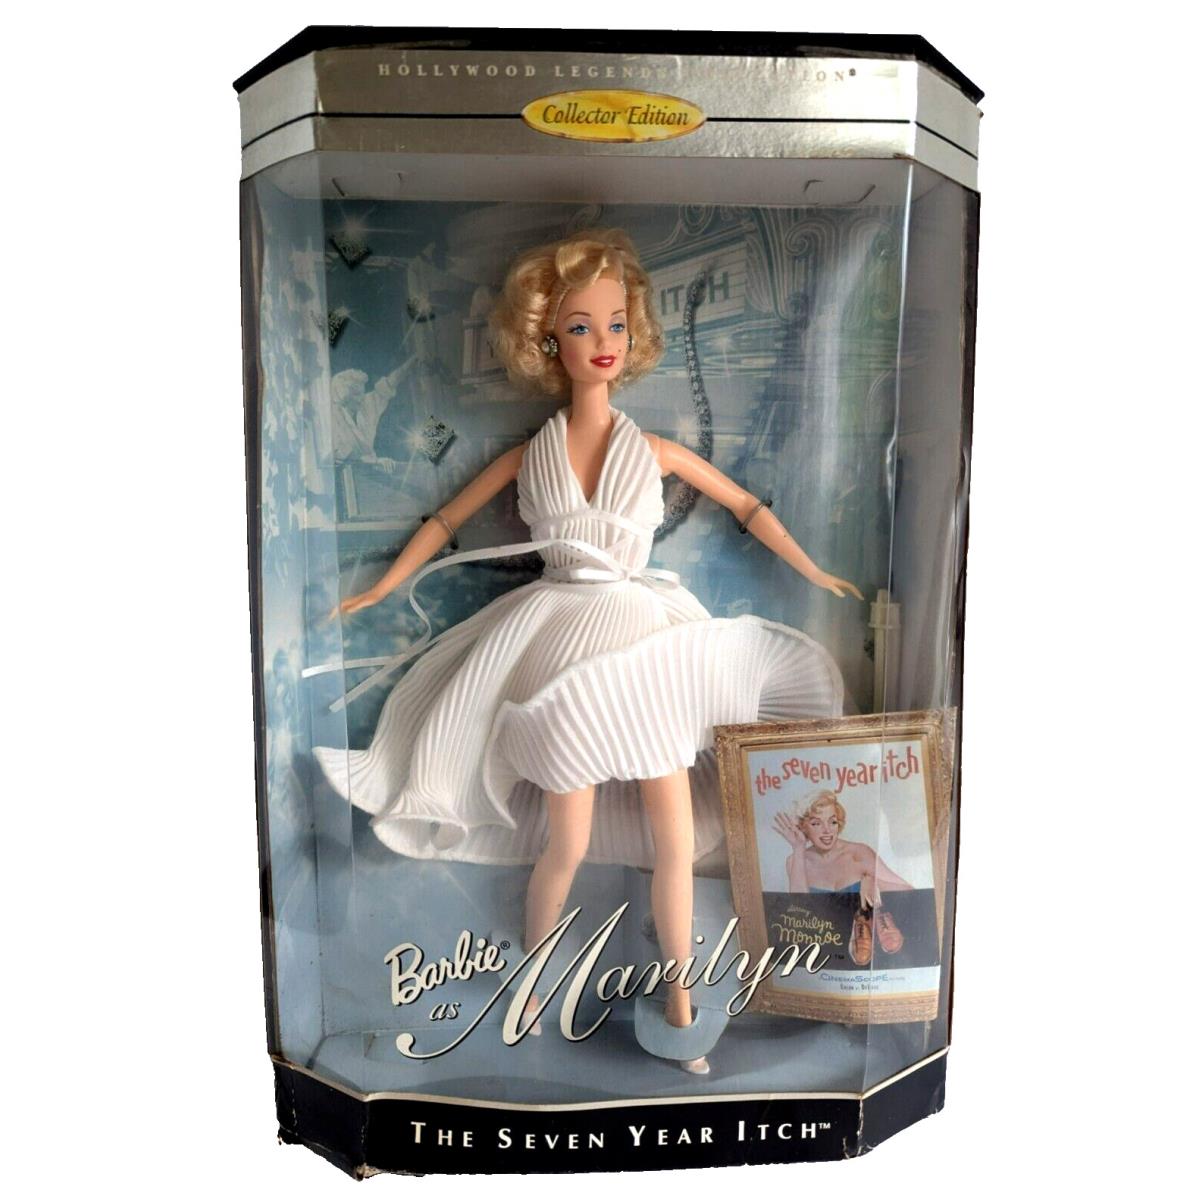 Barbie as Marilyn Monroe 1997 Mattel The Seven Year Itch Collector Edition 17155